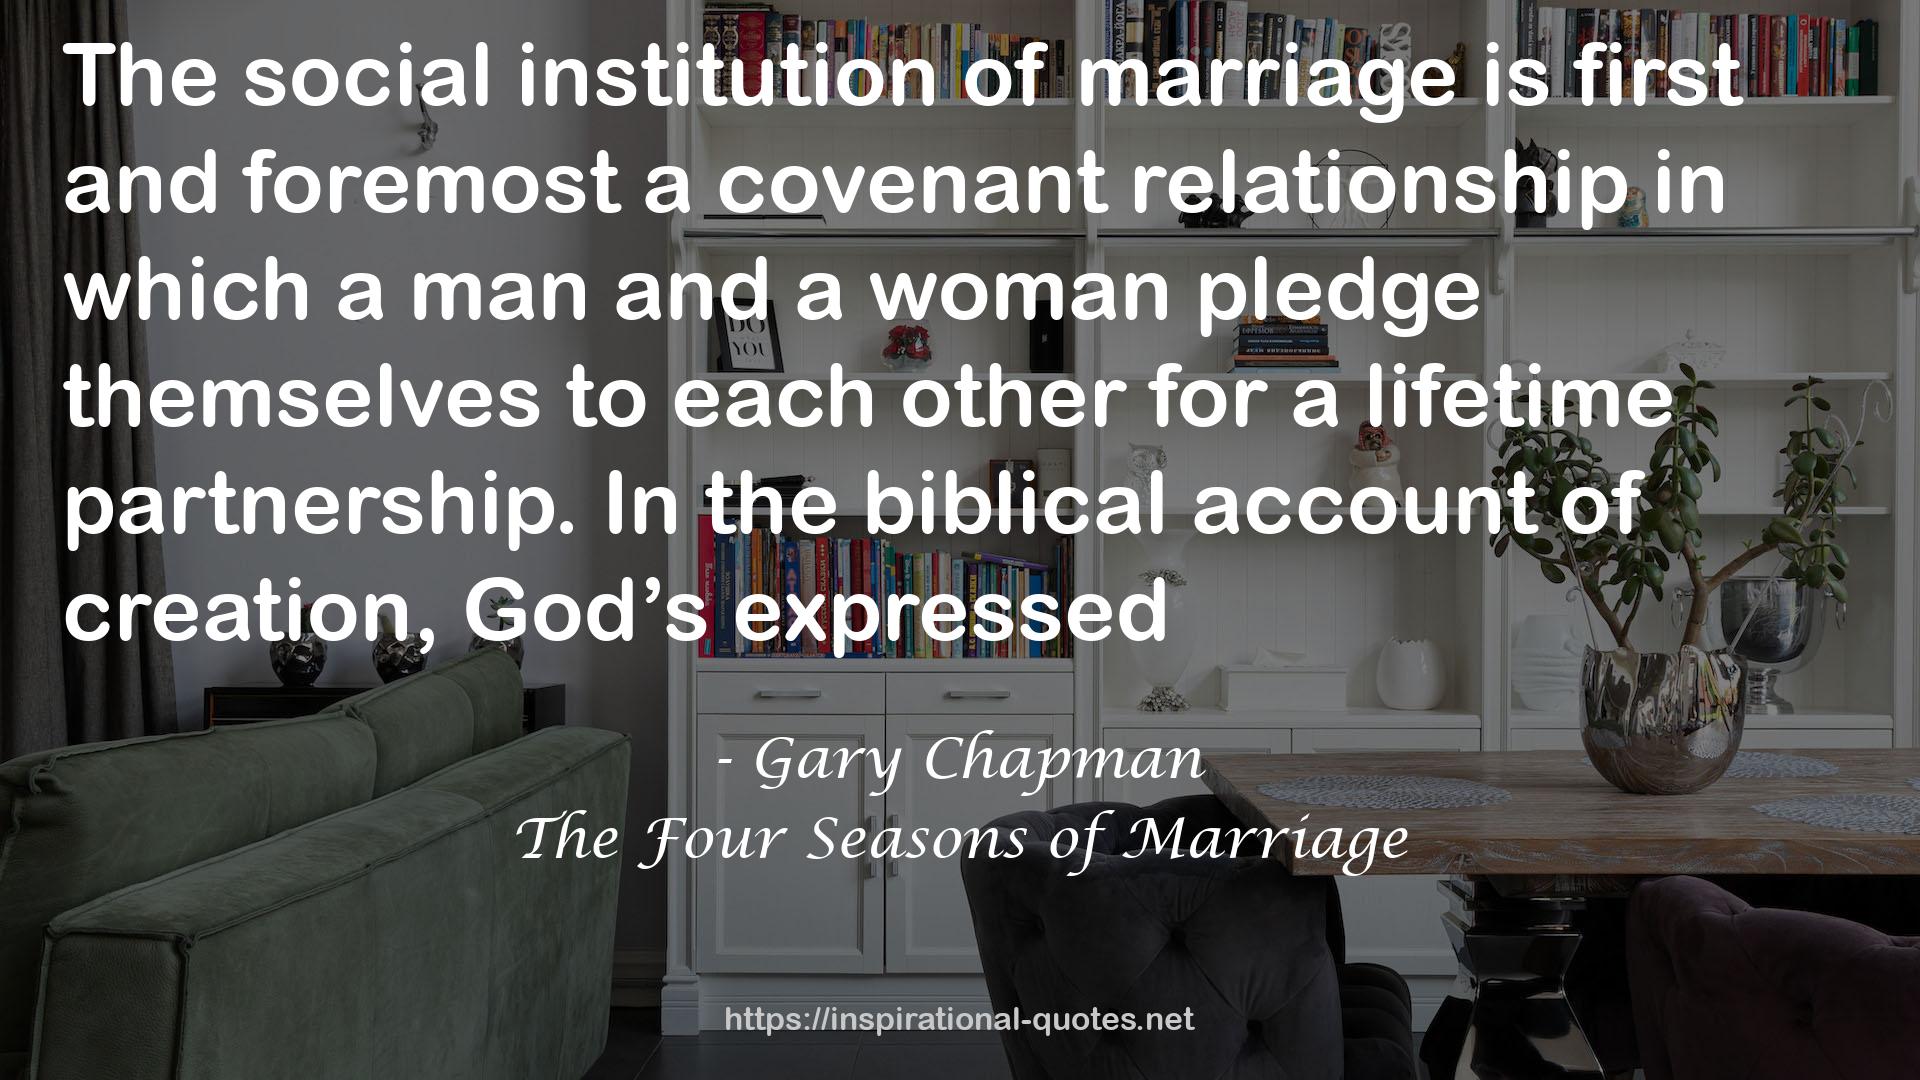 The Four Seasons of Marriage QUOTES